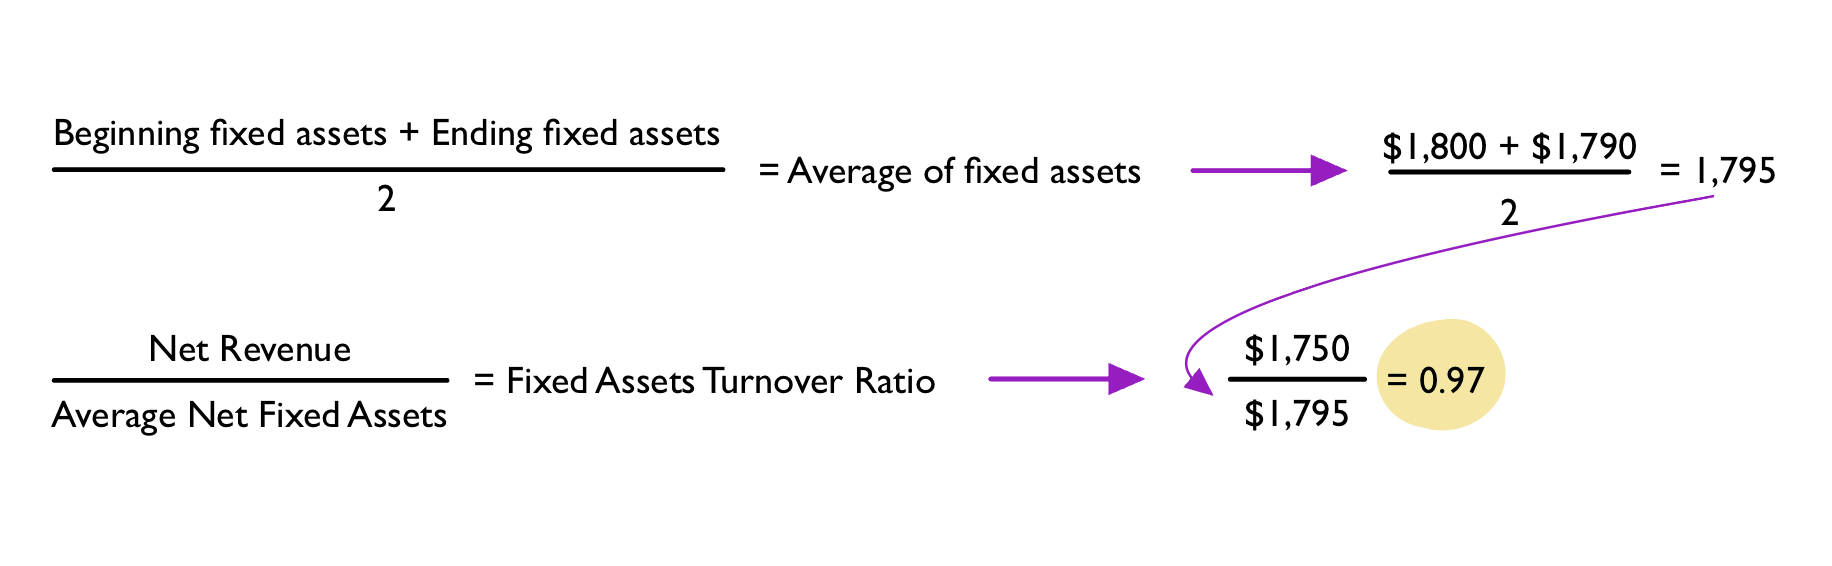 Fixed asset turnover ratio = 0.97